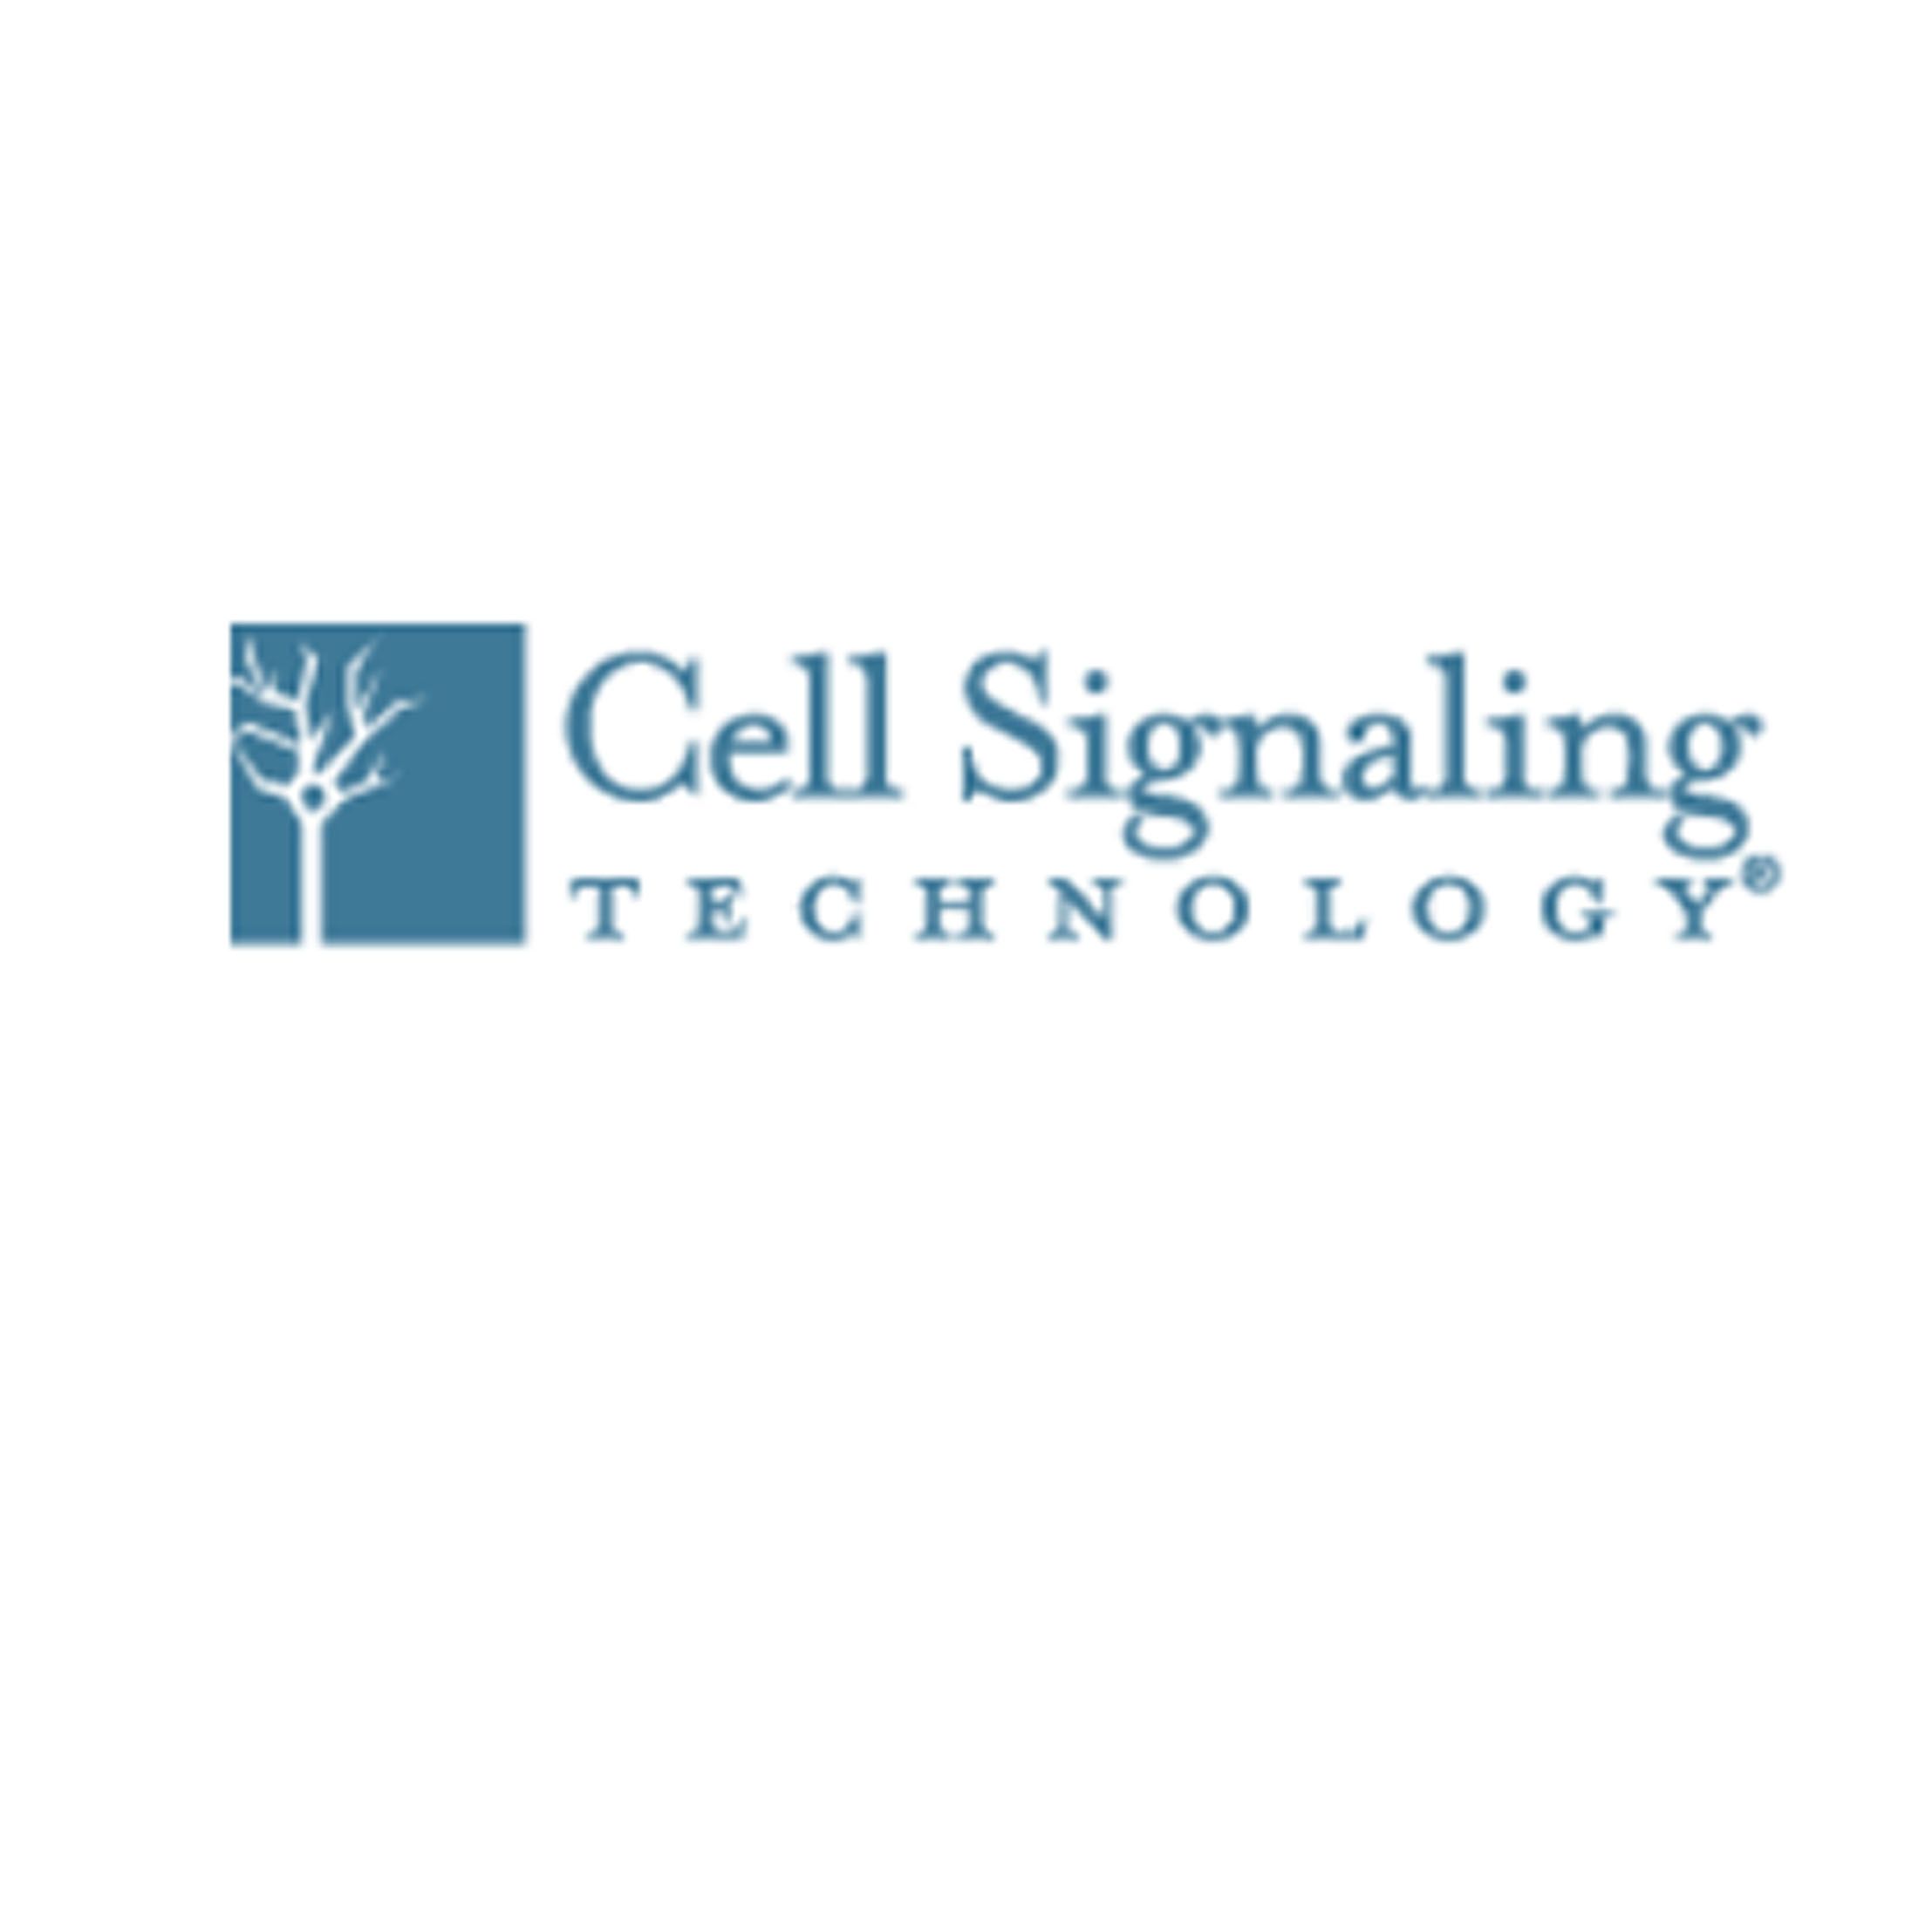 CST Cell Signaling Technology (CST) 抗体、试剂、蛋白质组学